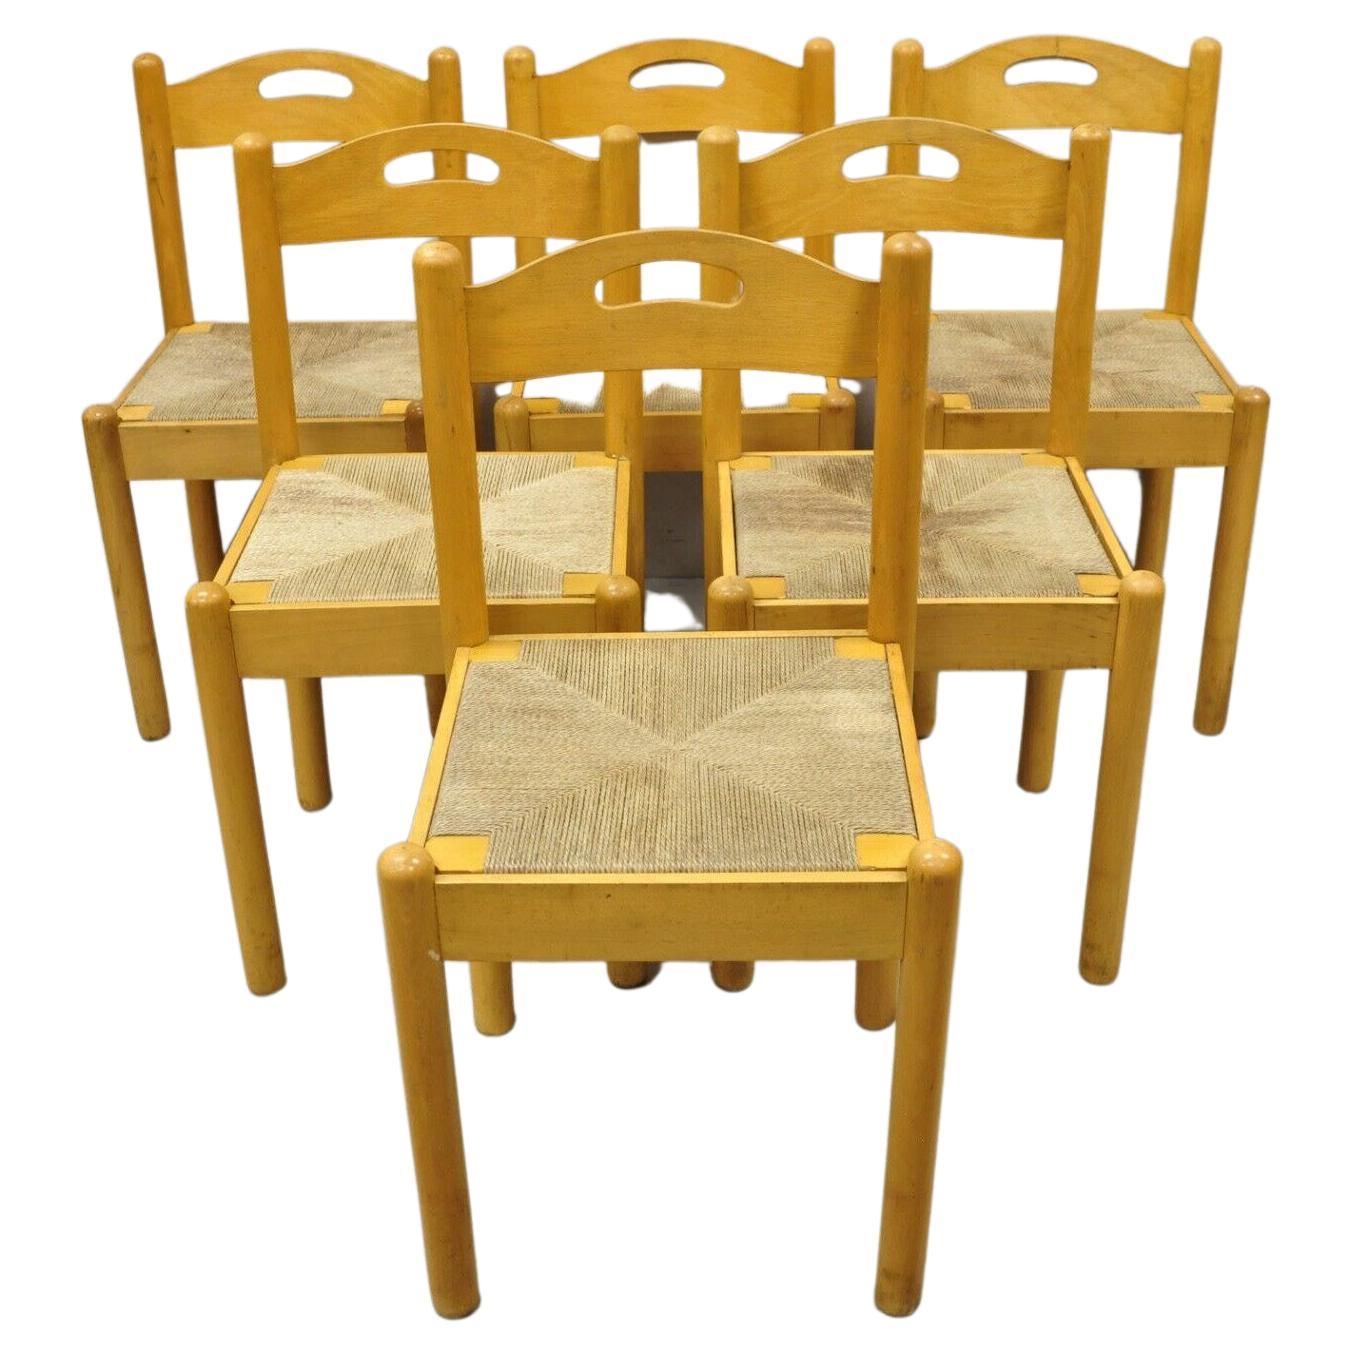 Mid Century Modern Birch Maple Bentwood Dining Chairs Rope Cord Seats - Set of 6 For Sale